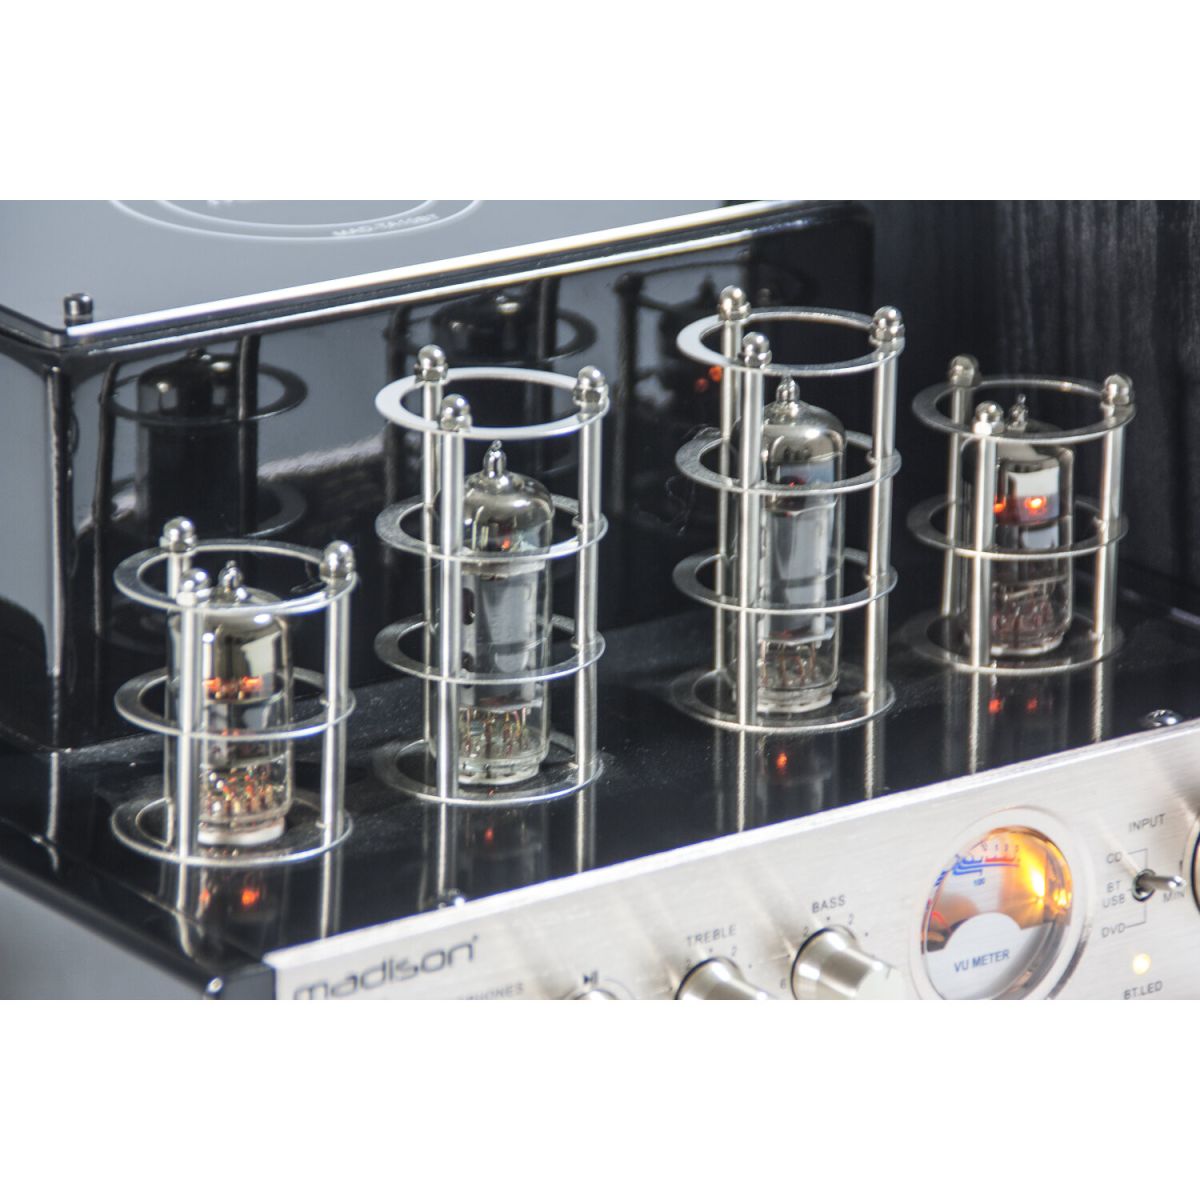 A hybrid tube amplifier can operate with only one tube